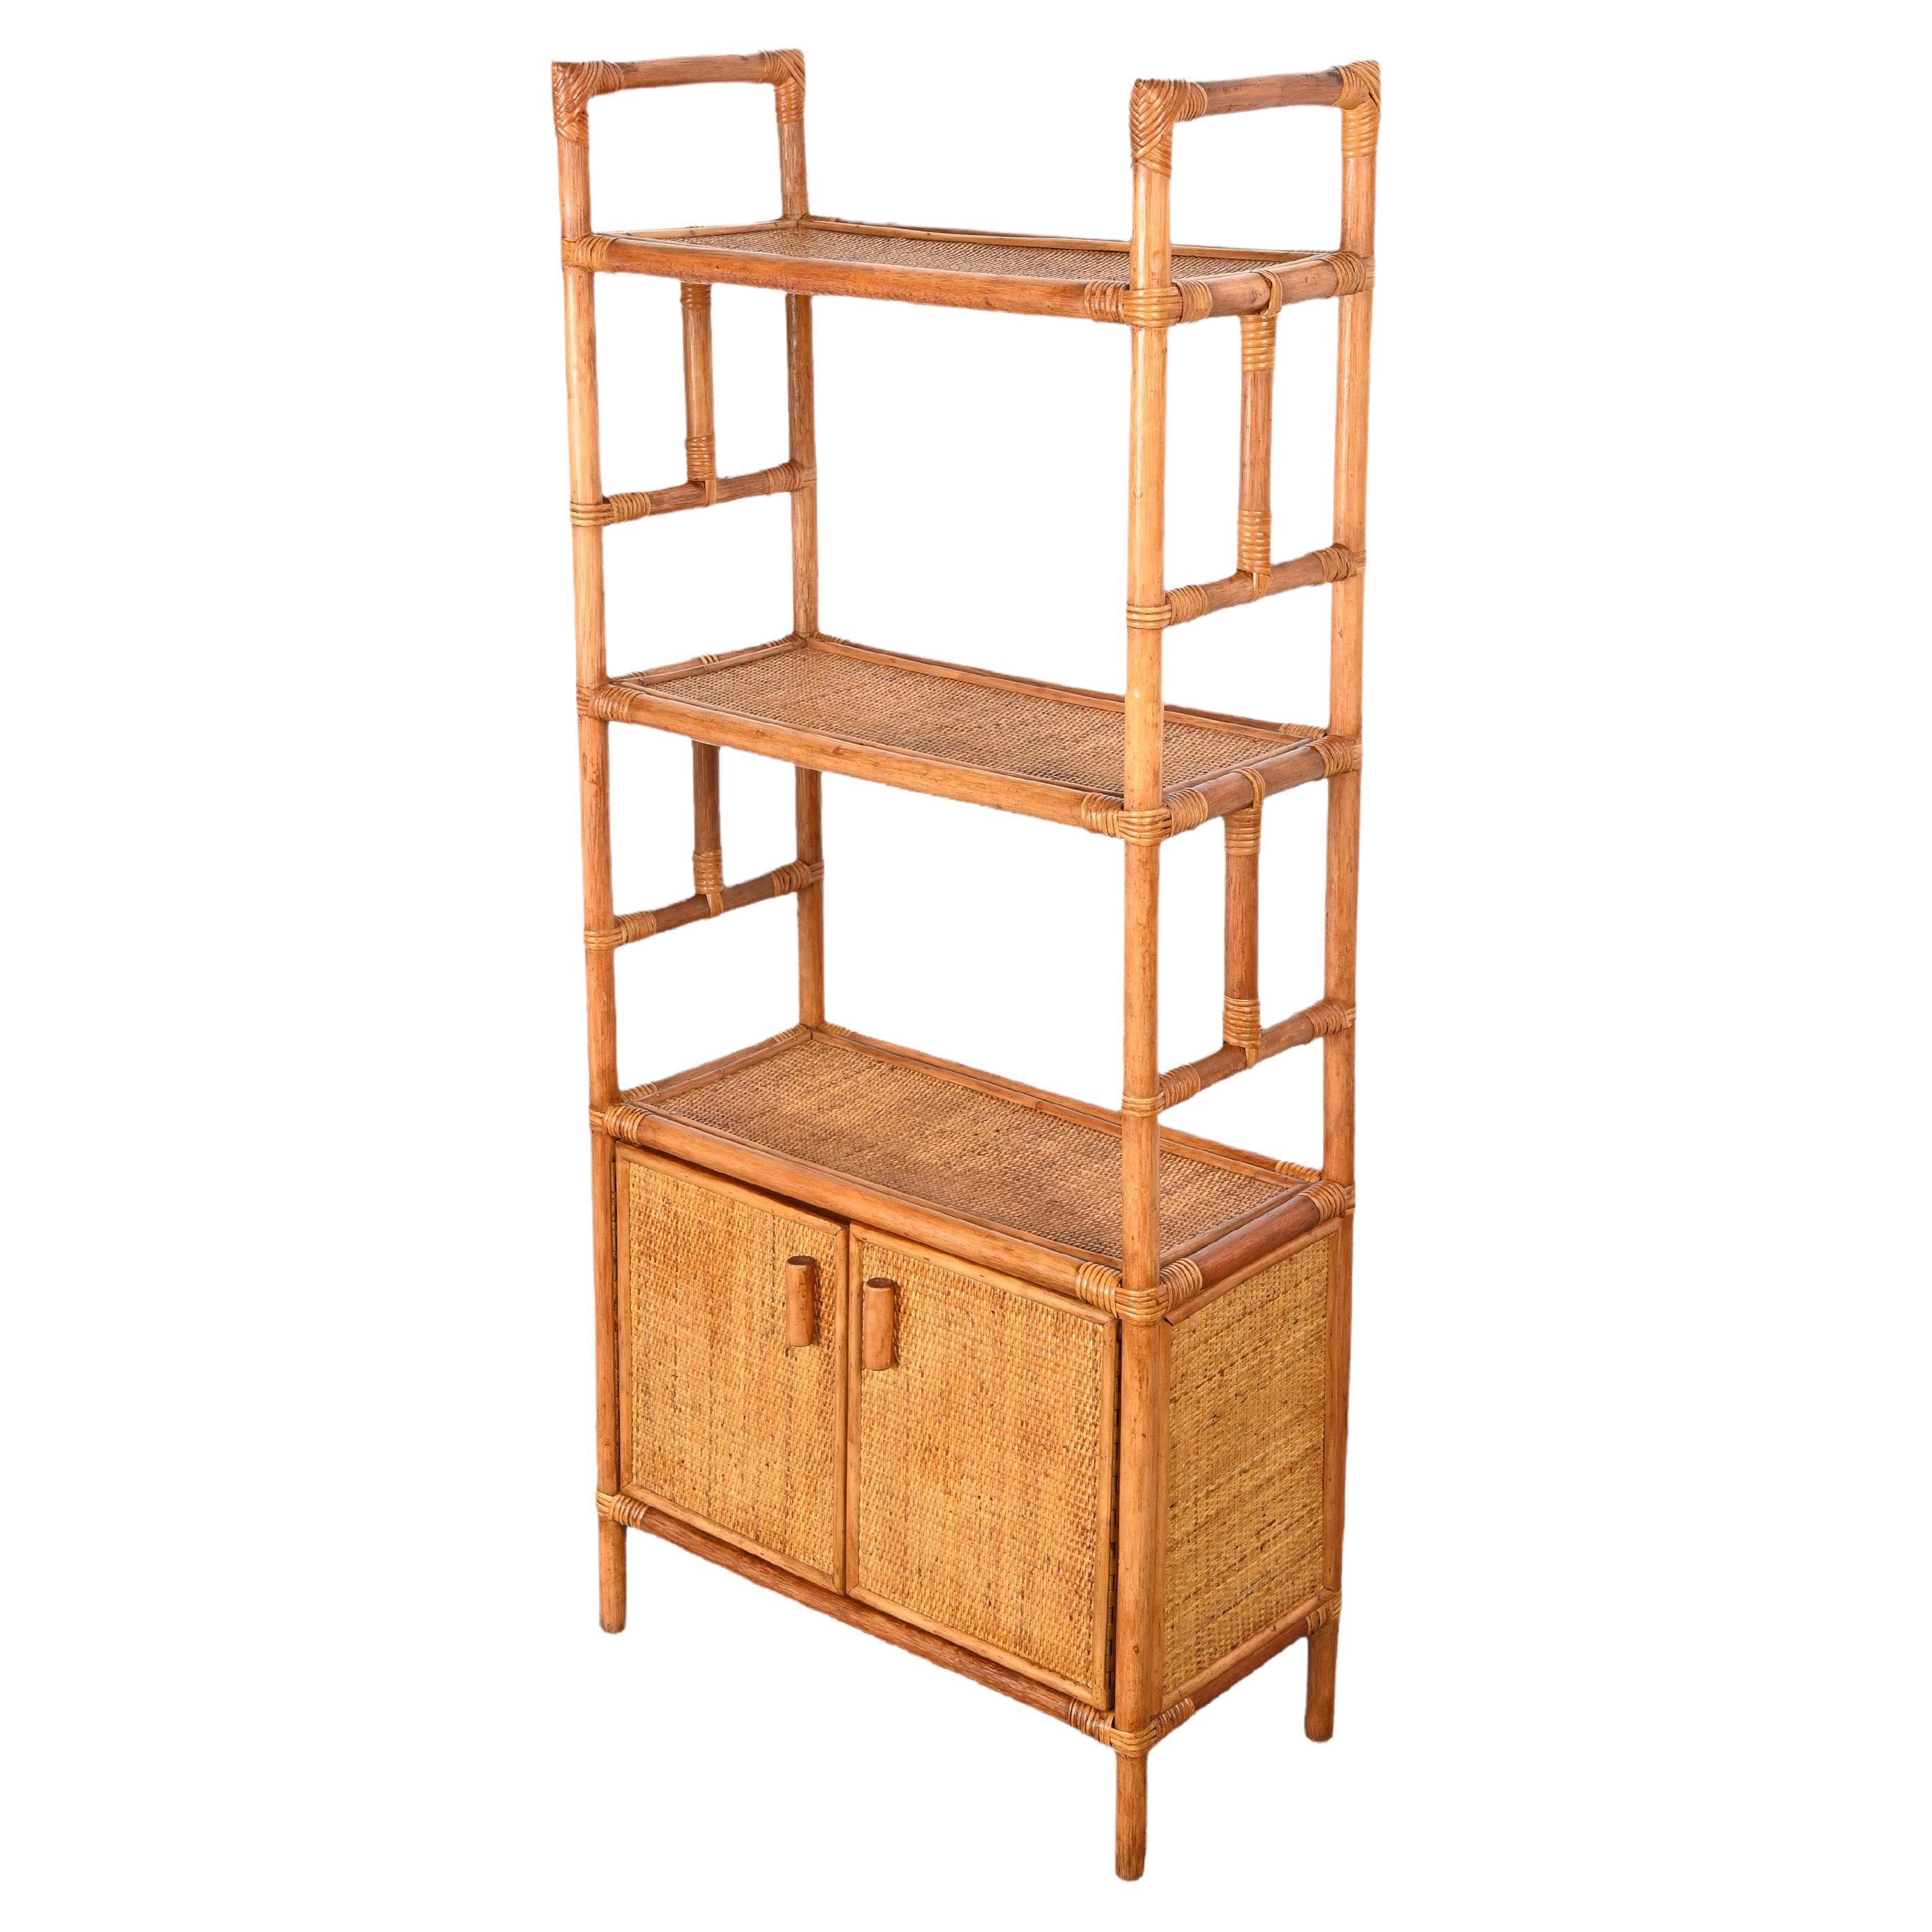 Midcentury Italian Modern Rattan and Bamboo Bookcase with Doors, 1970s